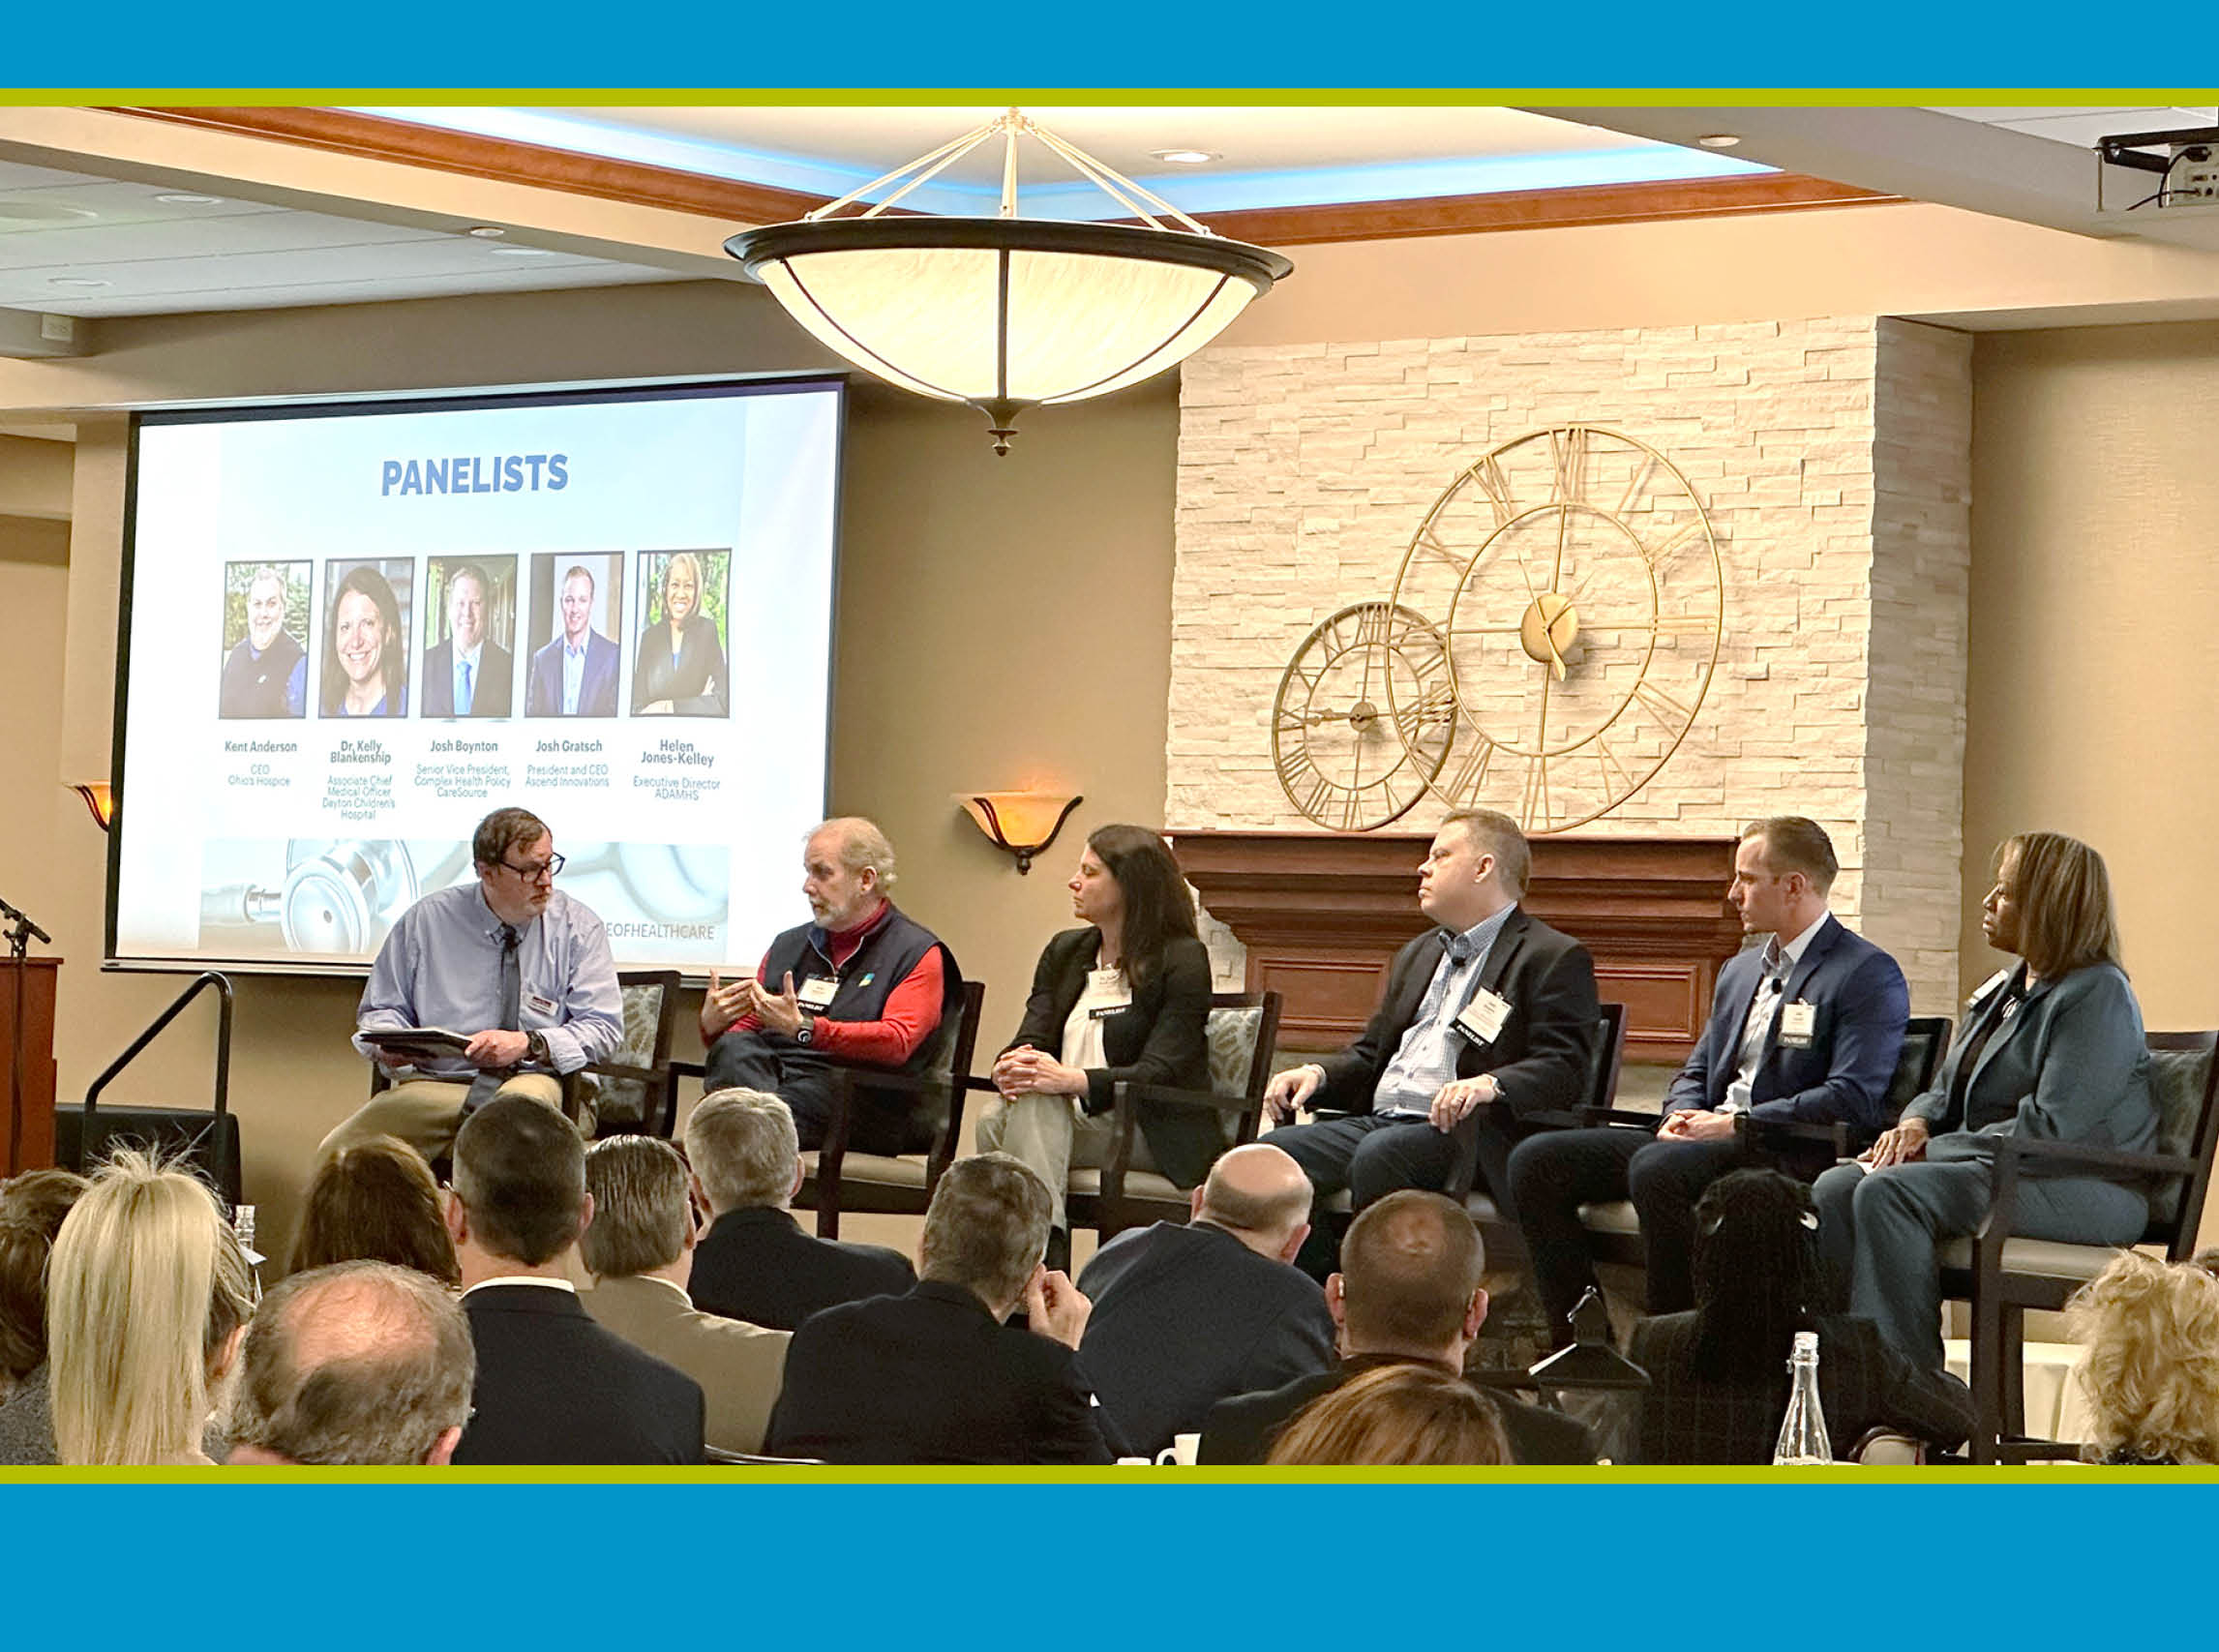 Ohio’s Hospice CEO Participates as Panelist in Dayton Business Journal’s Future of Health Care Event